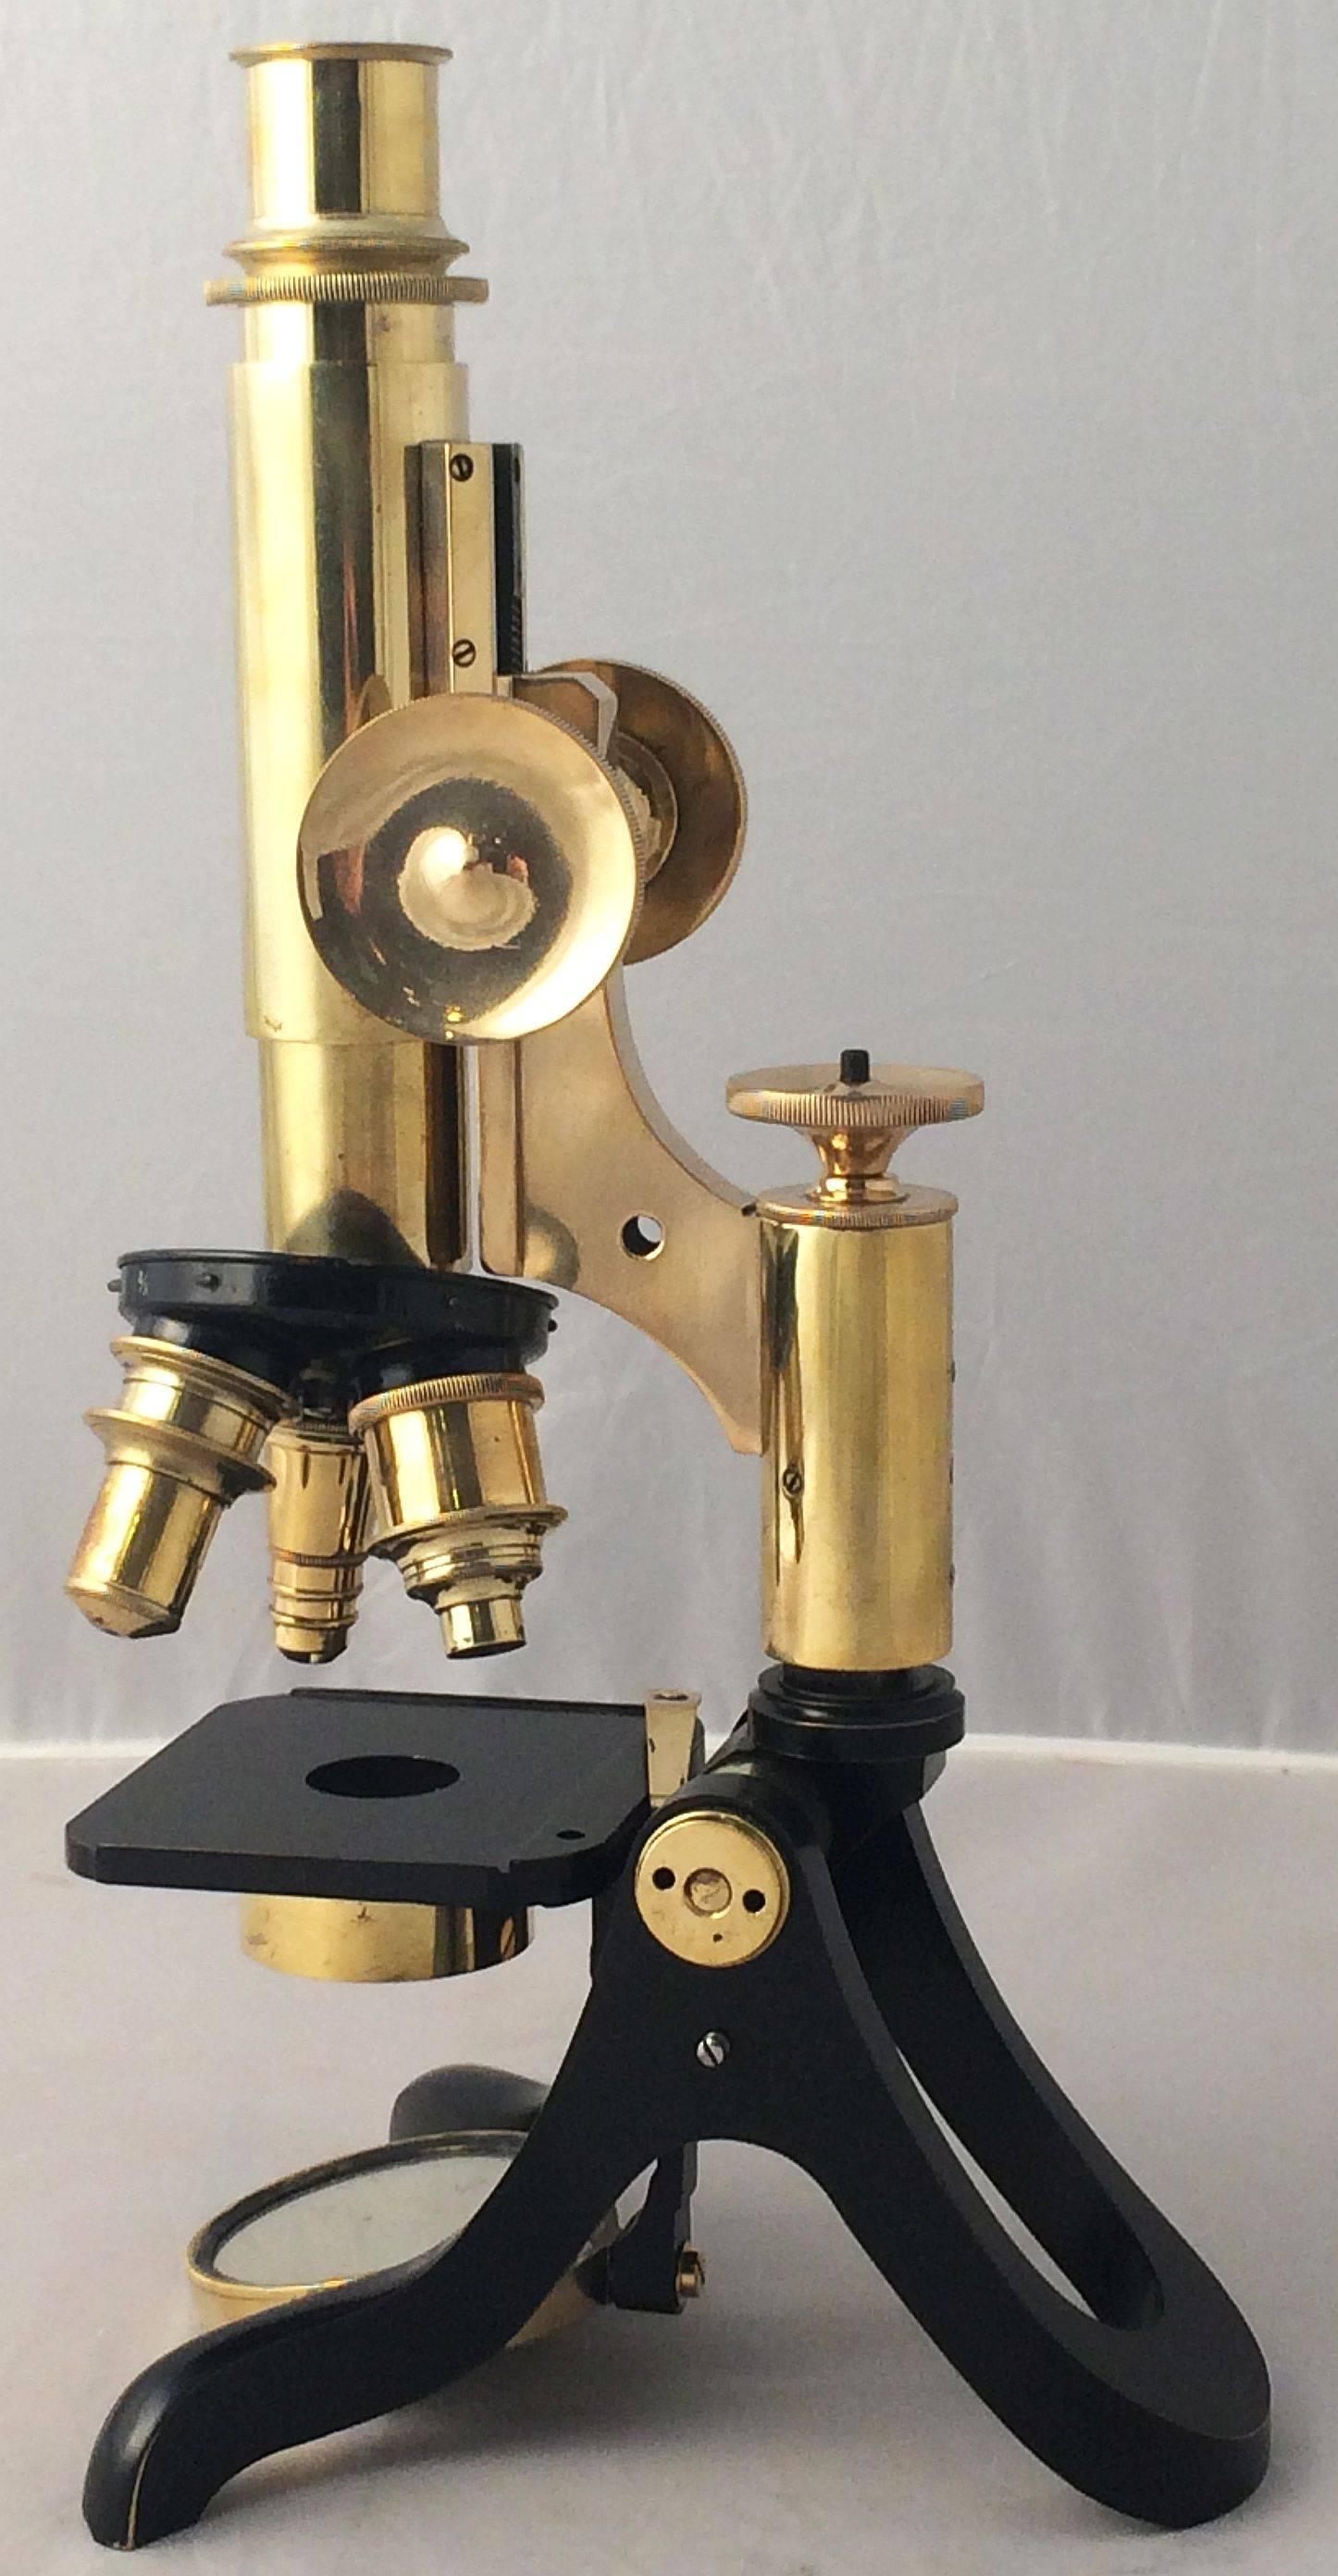 henry crouch microscope